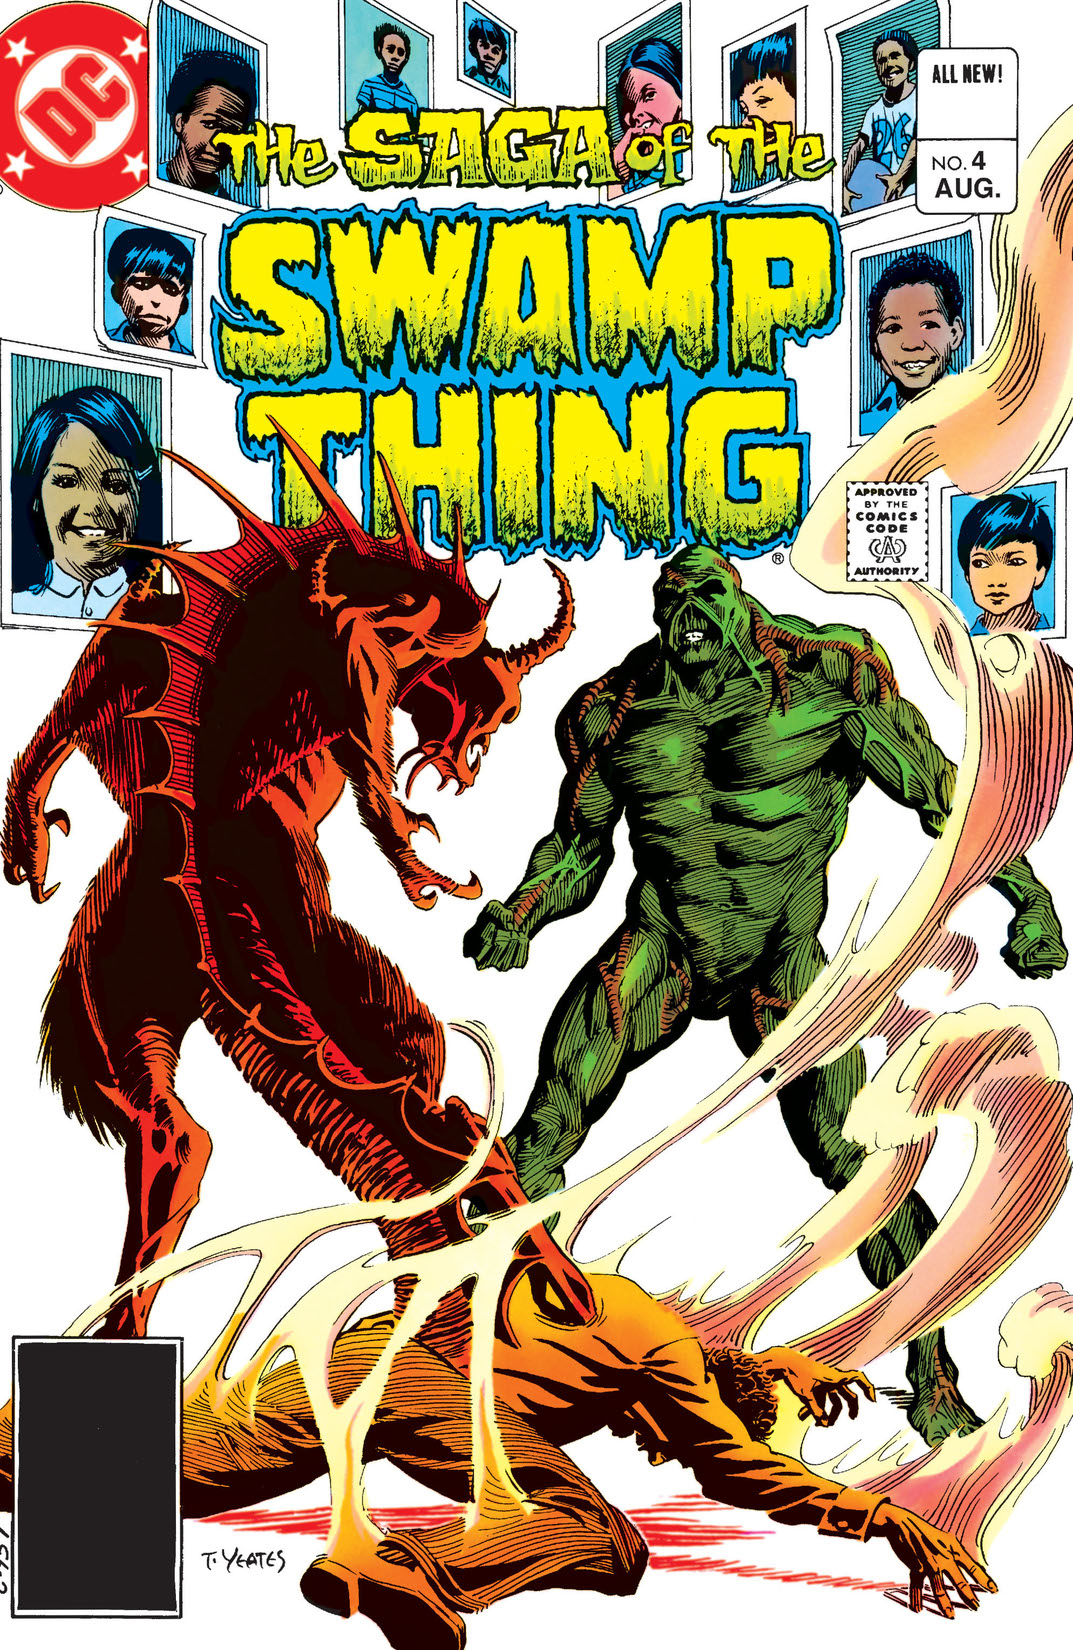 The Saga of the Swamp Thing (1982-) #4 preview images